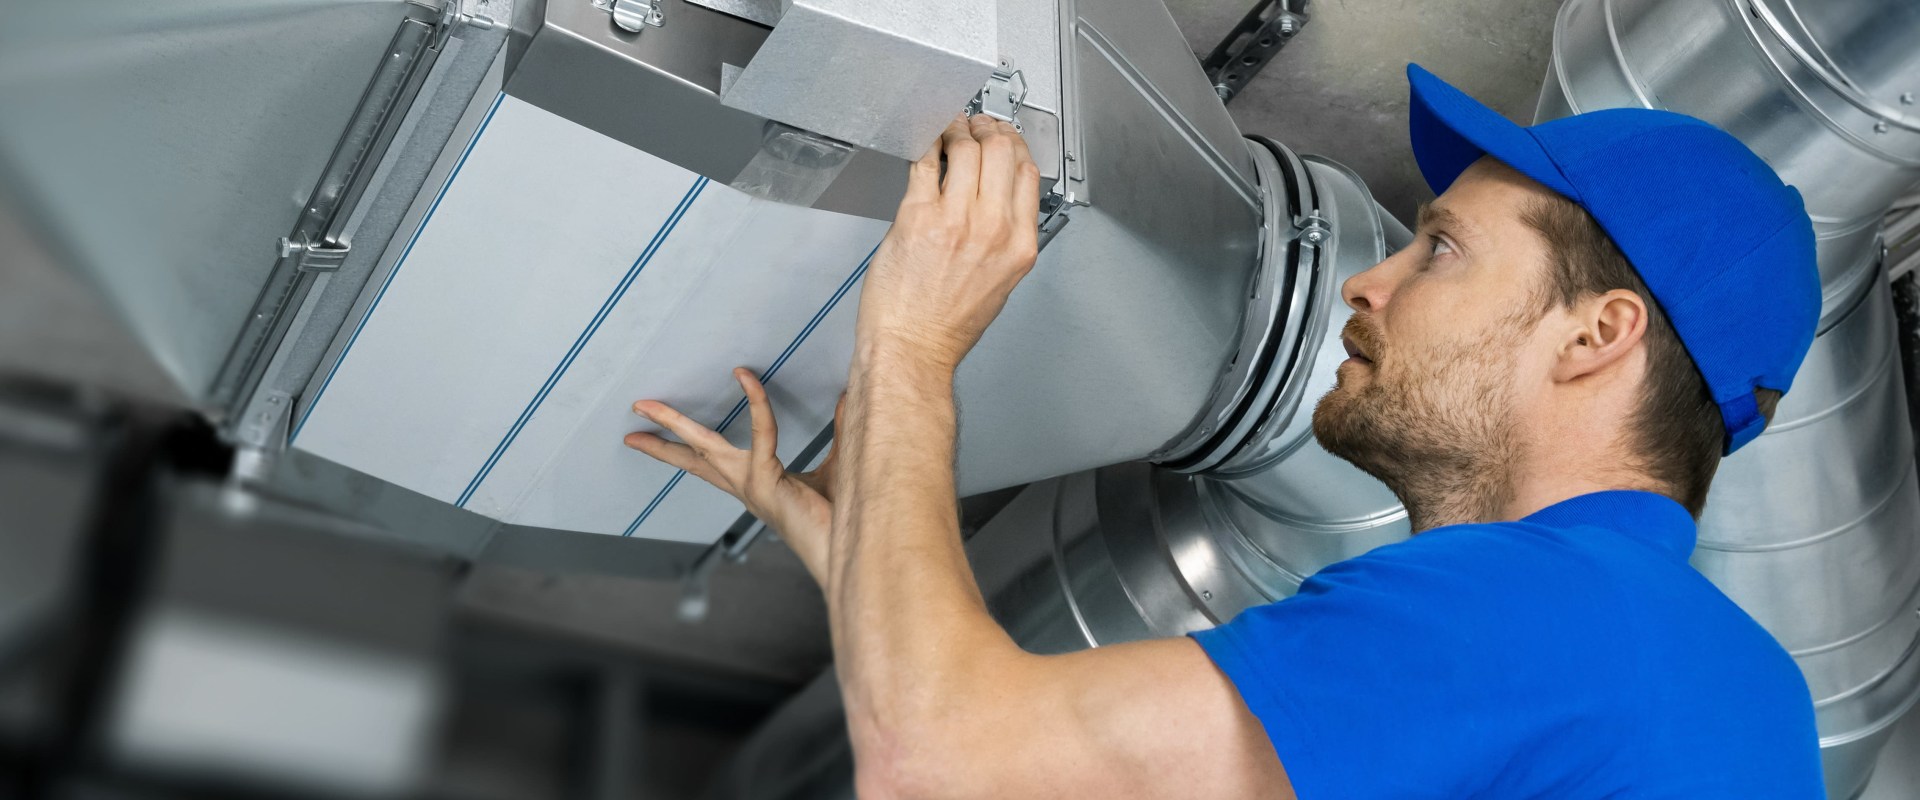 Does HVAC Maintenance in Coral Springs, FL Offer Installation and Repair of Zoning Systems and Ductwork?